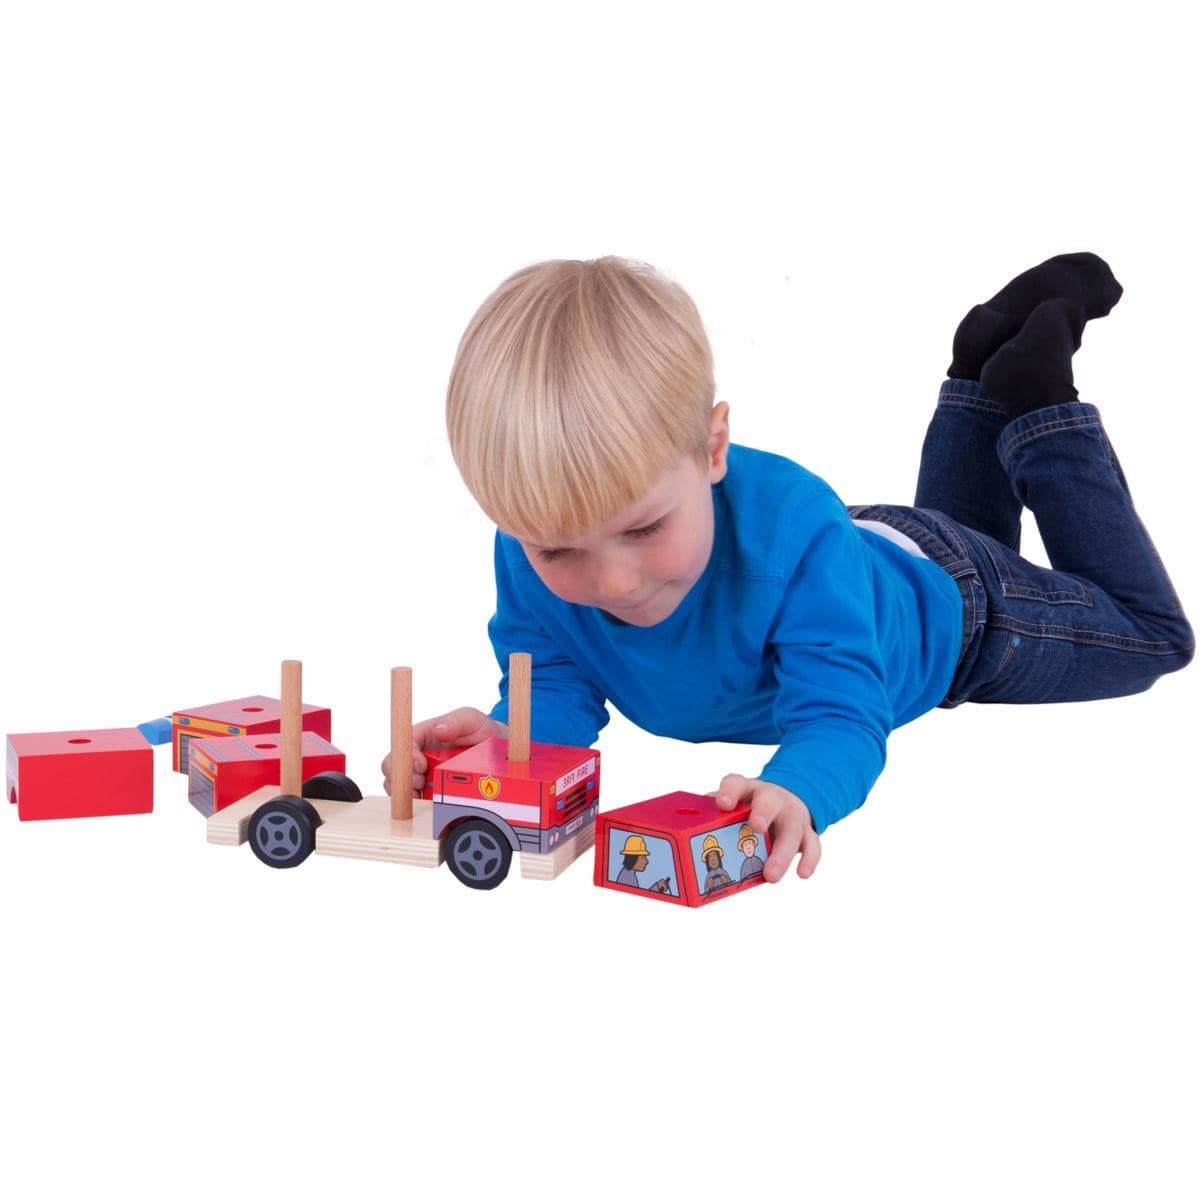 Stacking Fire Engine, Discover Double the Fun with the Bigjigs Stacking Fire Engine!Sound the alarm and get ready for action-packed fun and learning with our Bigjigs Stacking Fire Engine! This 2-in-1 toy effortlessly combines the joy of stacking with the thrill of push-along play, making it a must-have for every young hero in training. Stacking Fire Engine Features: Stack & Go First, assemble the fire engine by stacking all the pieces in the correct order. Once the stacking fun is complete, it's time to pus